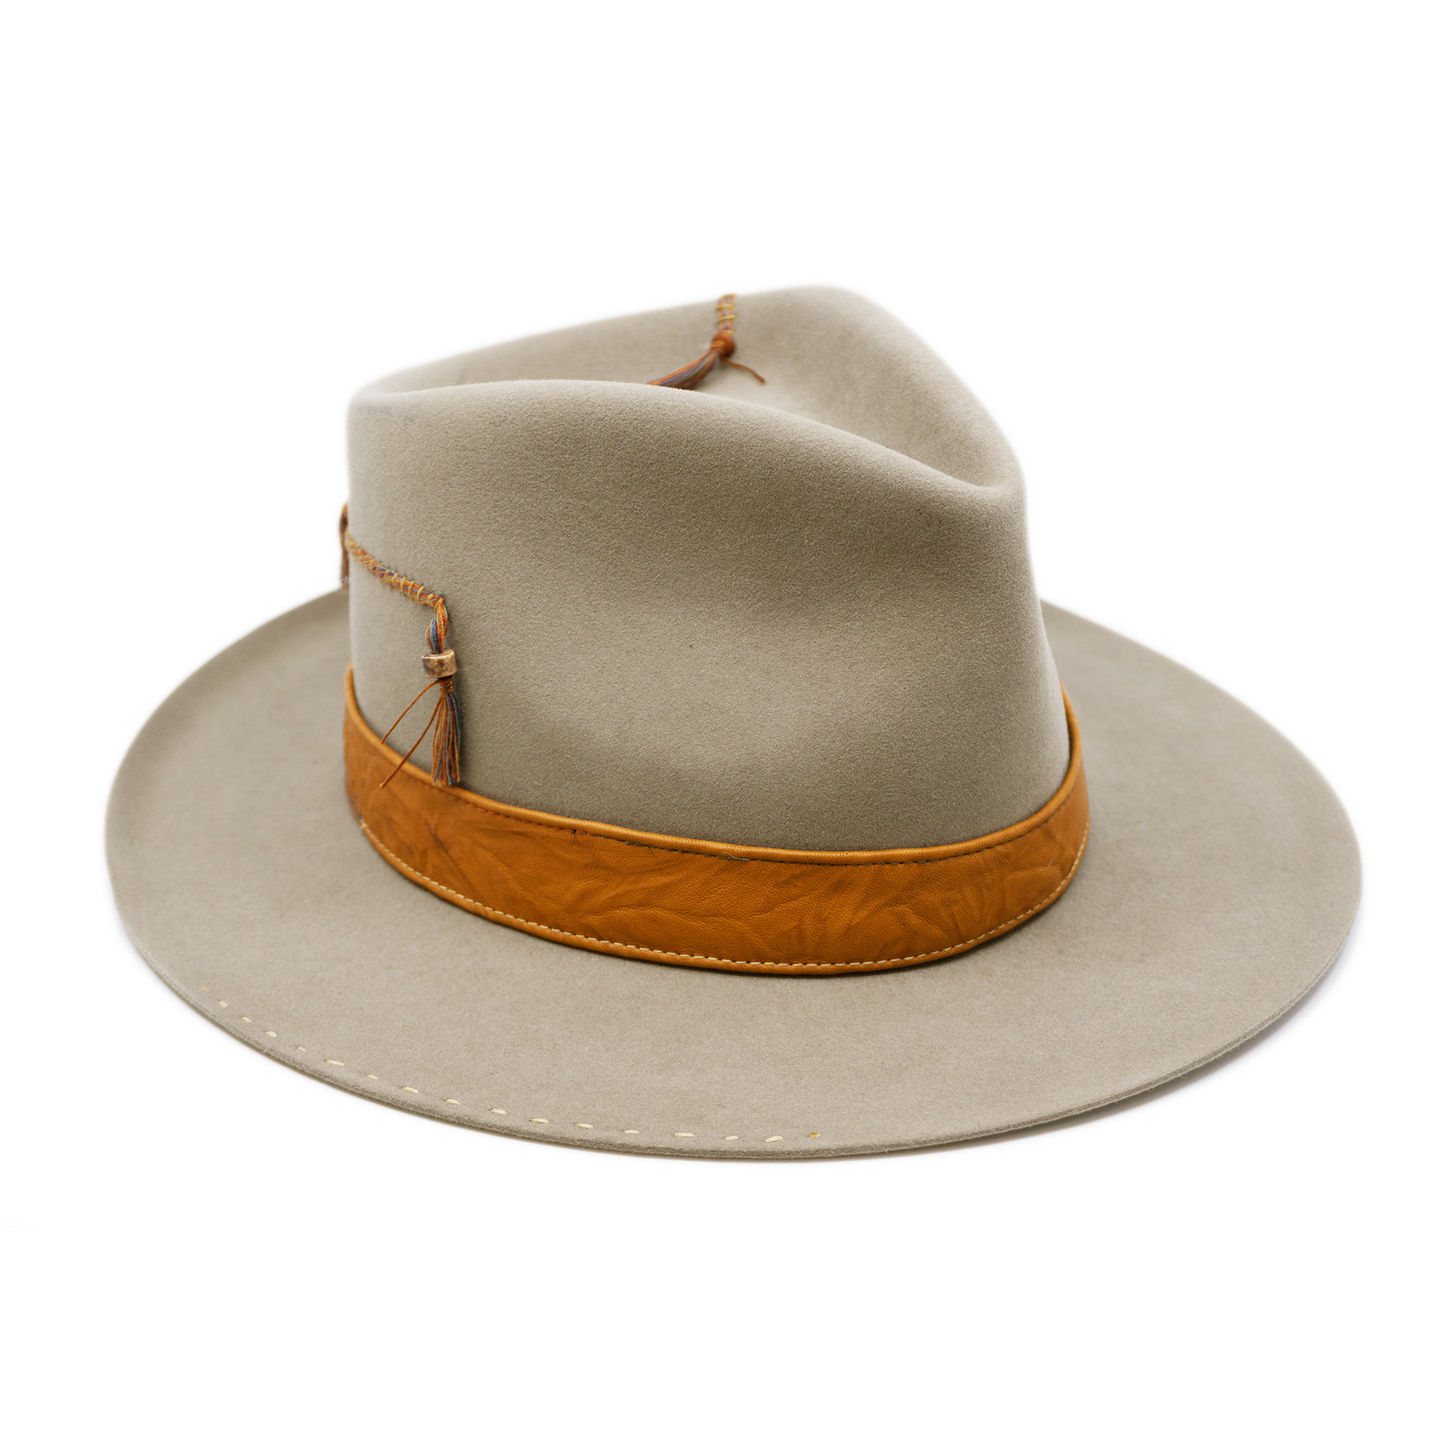 100% felt hat in Naturalll  Dress Weight   1” Caramel borello leather band   Brown tone threads with wax thread edge with cream bone beading  Multicolor hand stitching on crown   Back pencil curled brim  Made in USA 